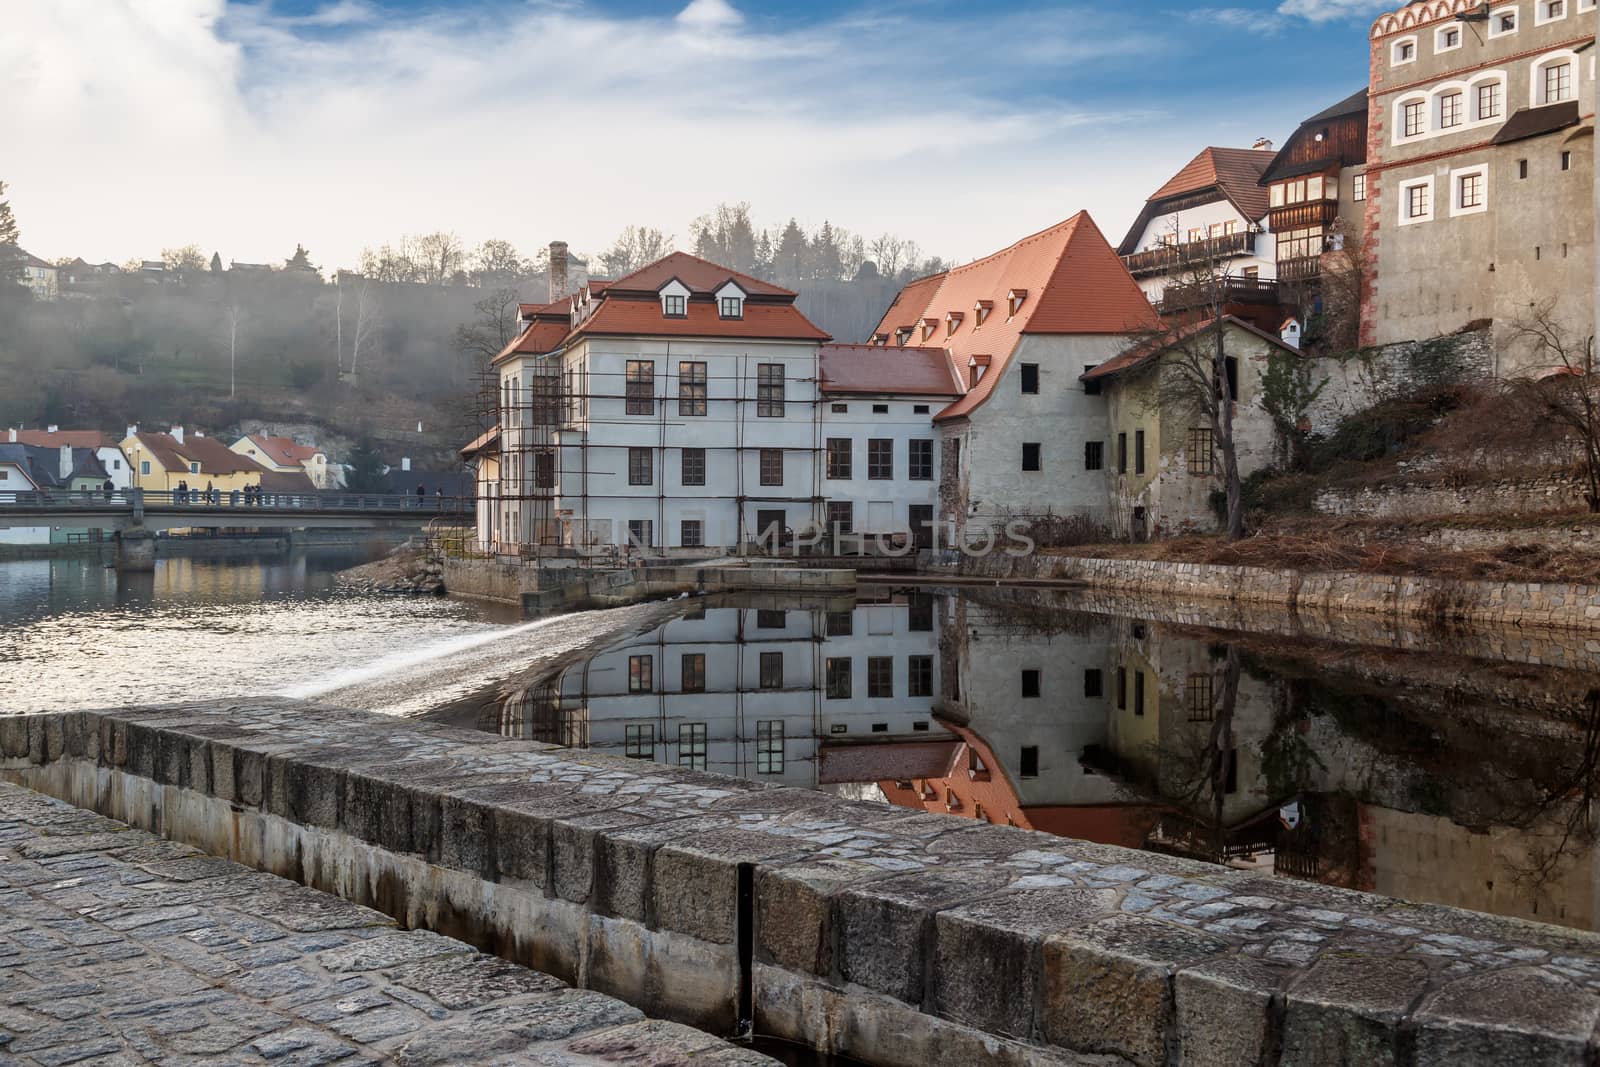 General Cesky Krumlov view with historical small houses along the river, on cloudy blue sky background.